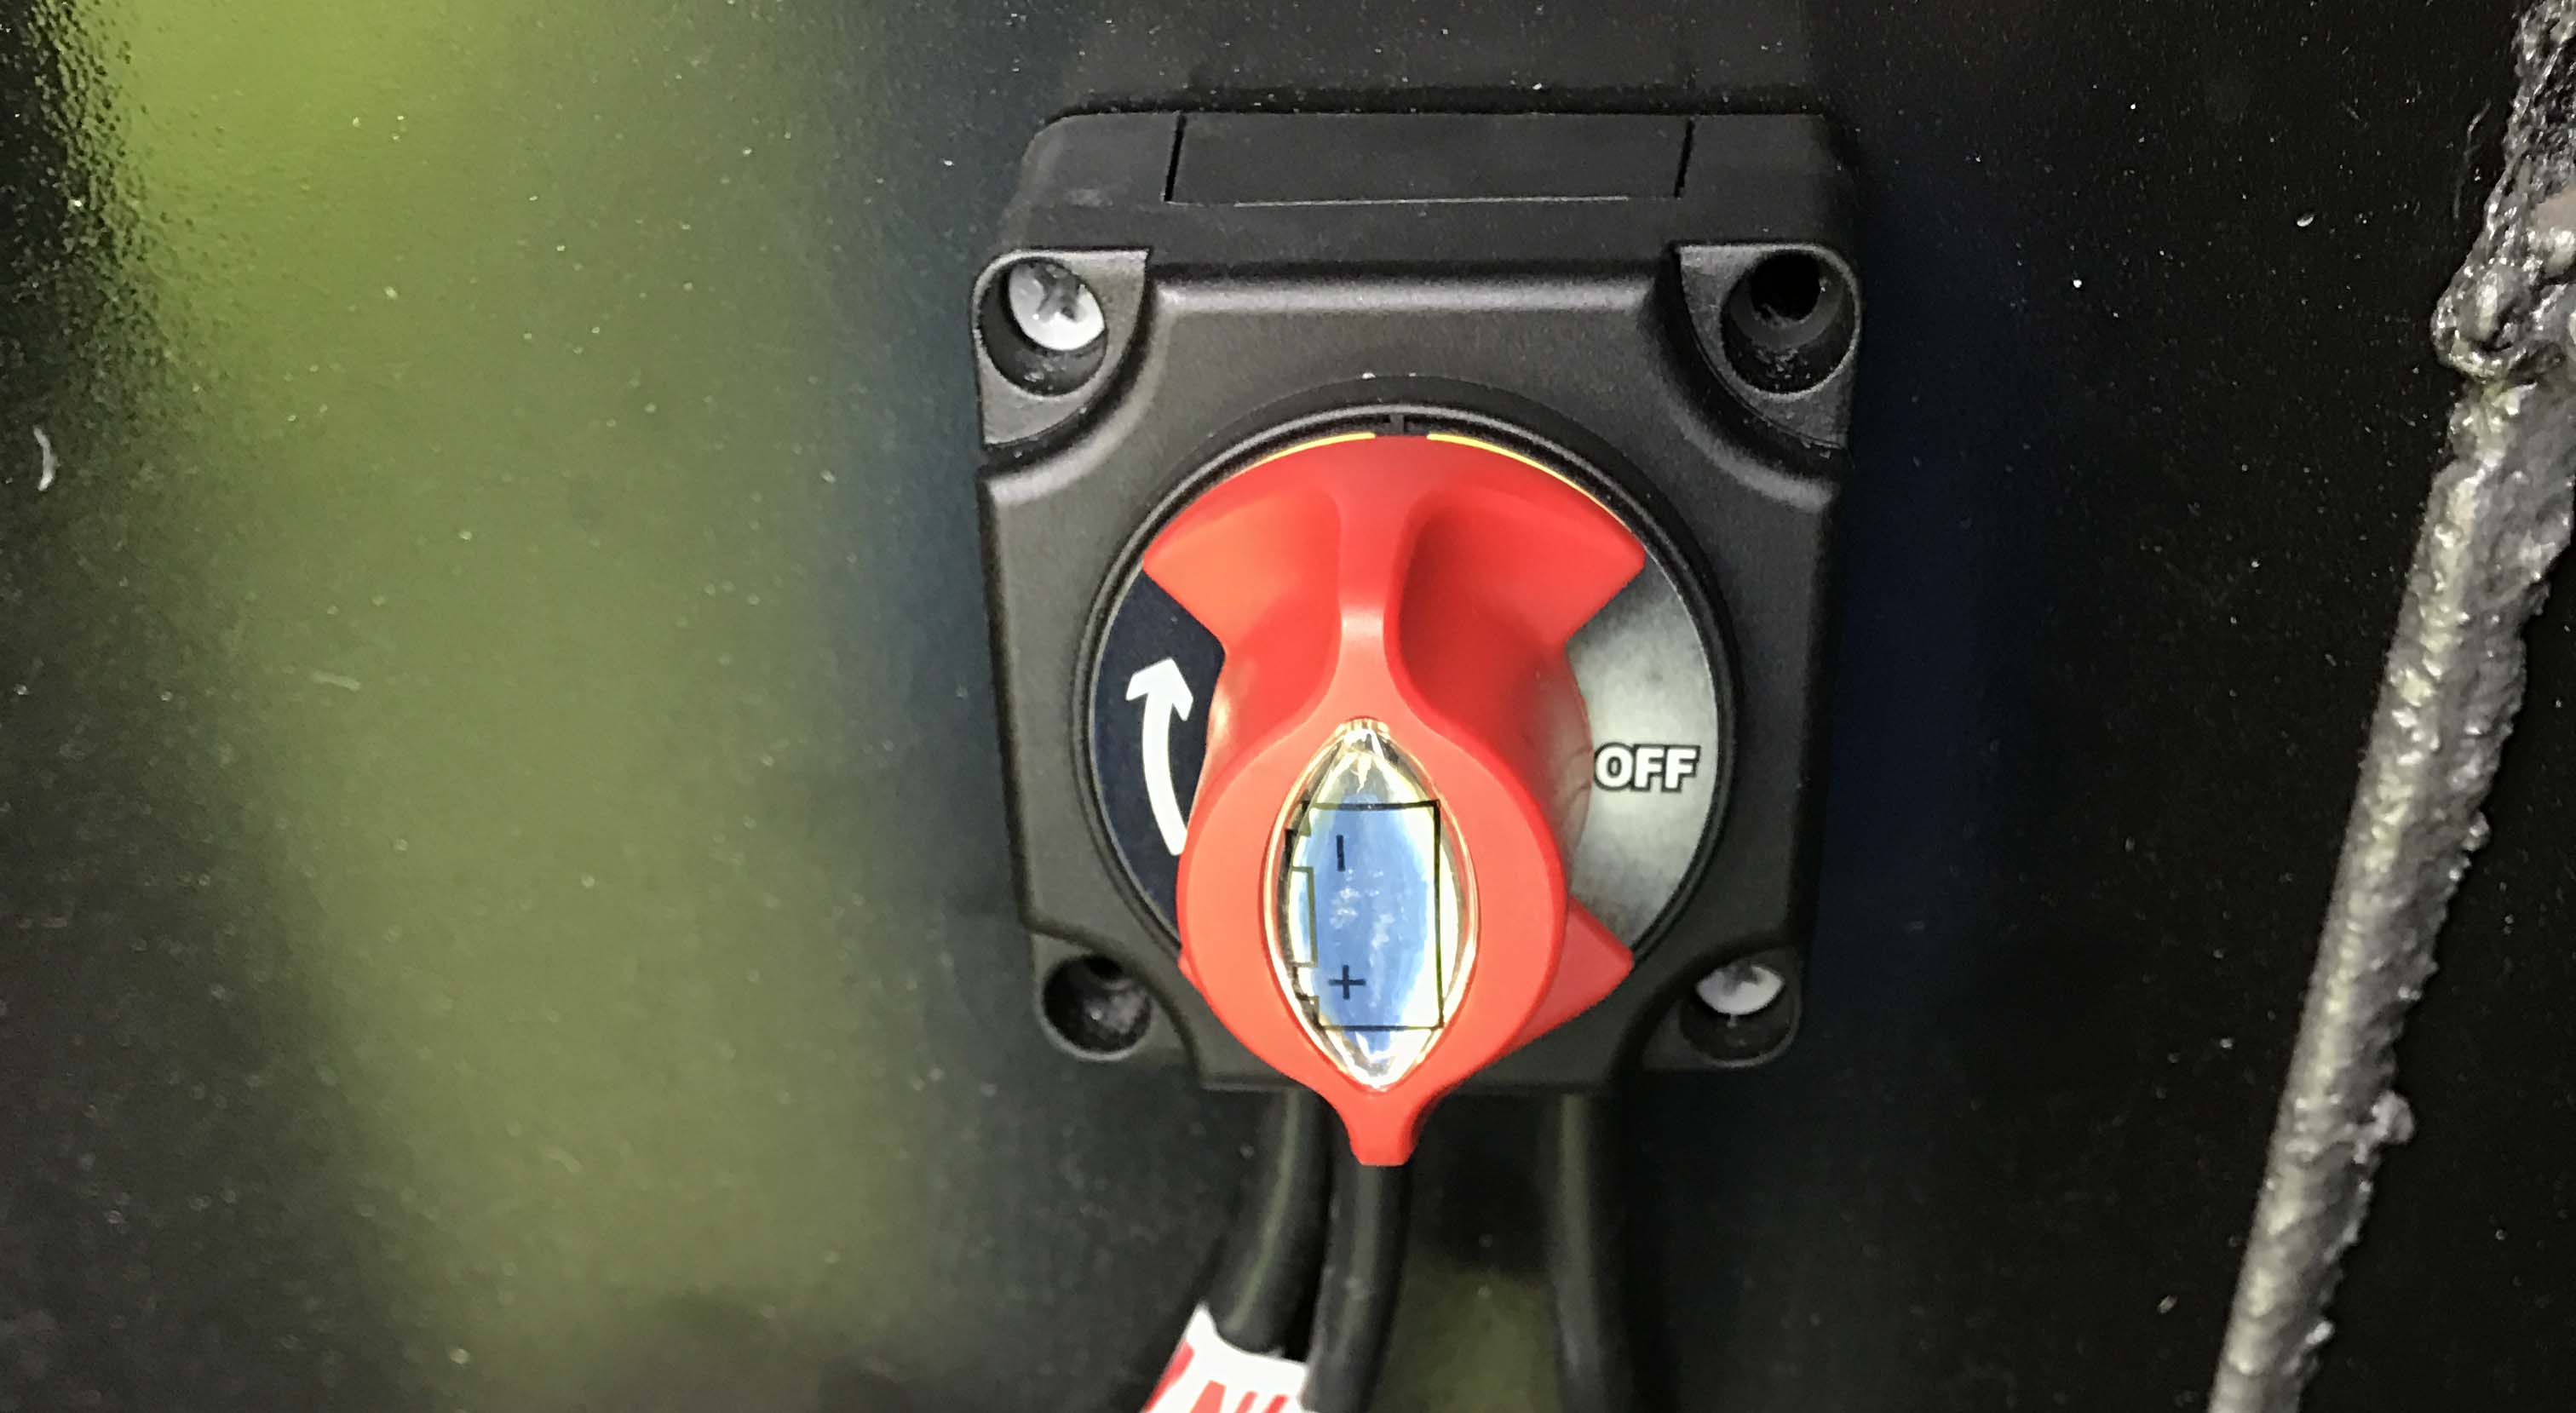 Installing an RV Battery Disconnect Switch